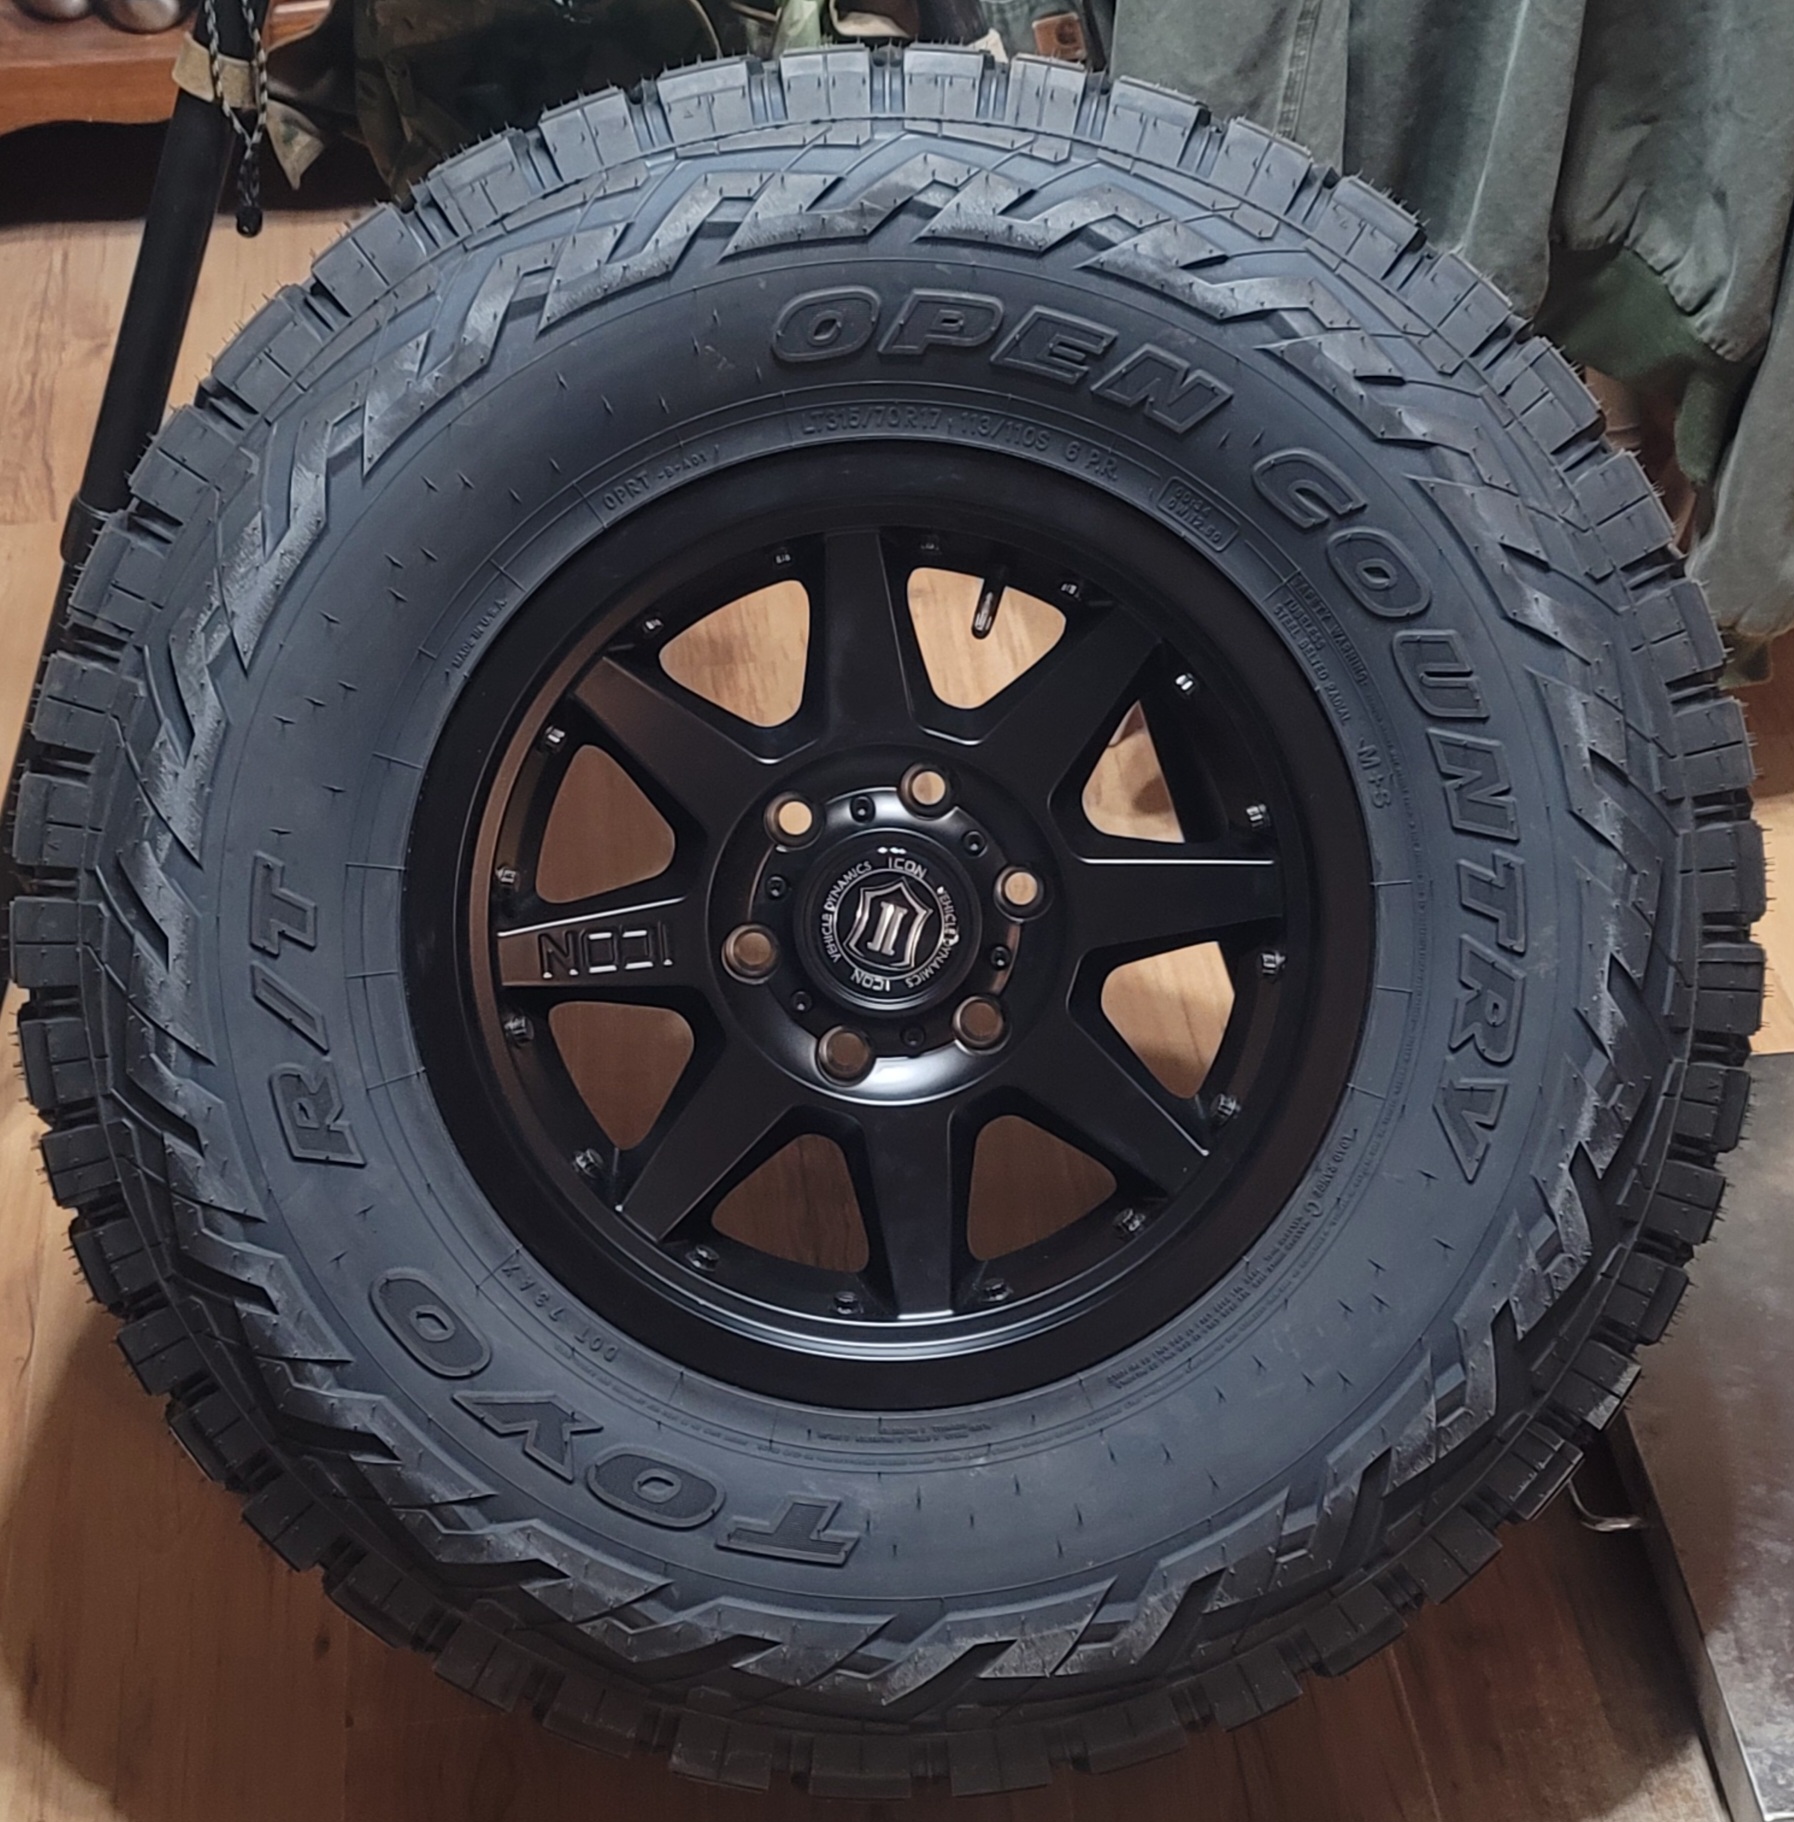 Ford Bronco Sasquatch Wheel and Tire Weights 20230324_194422